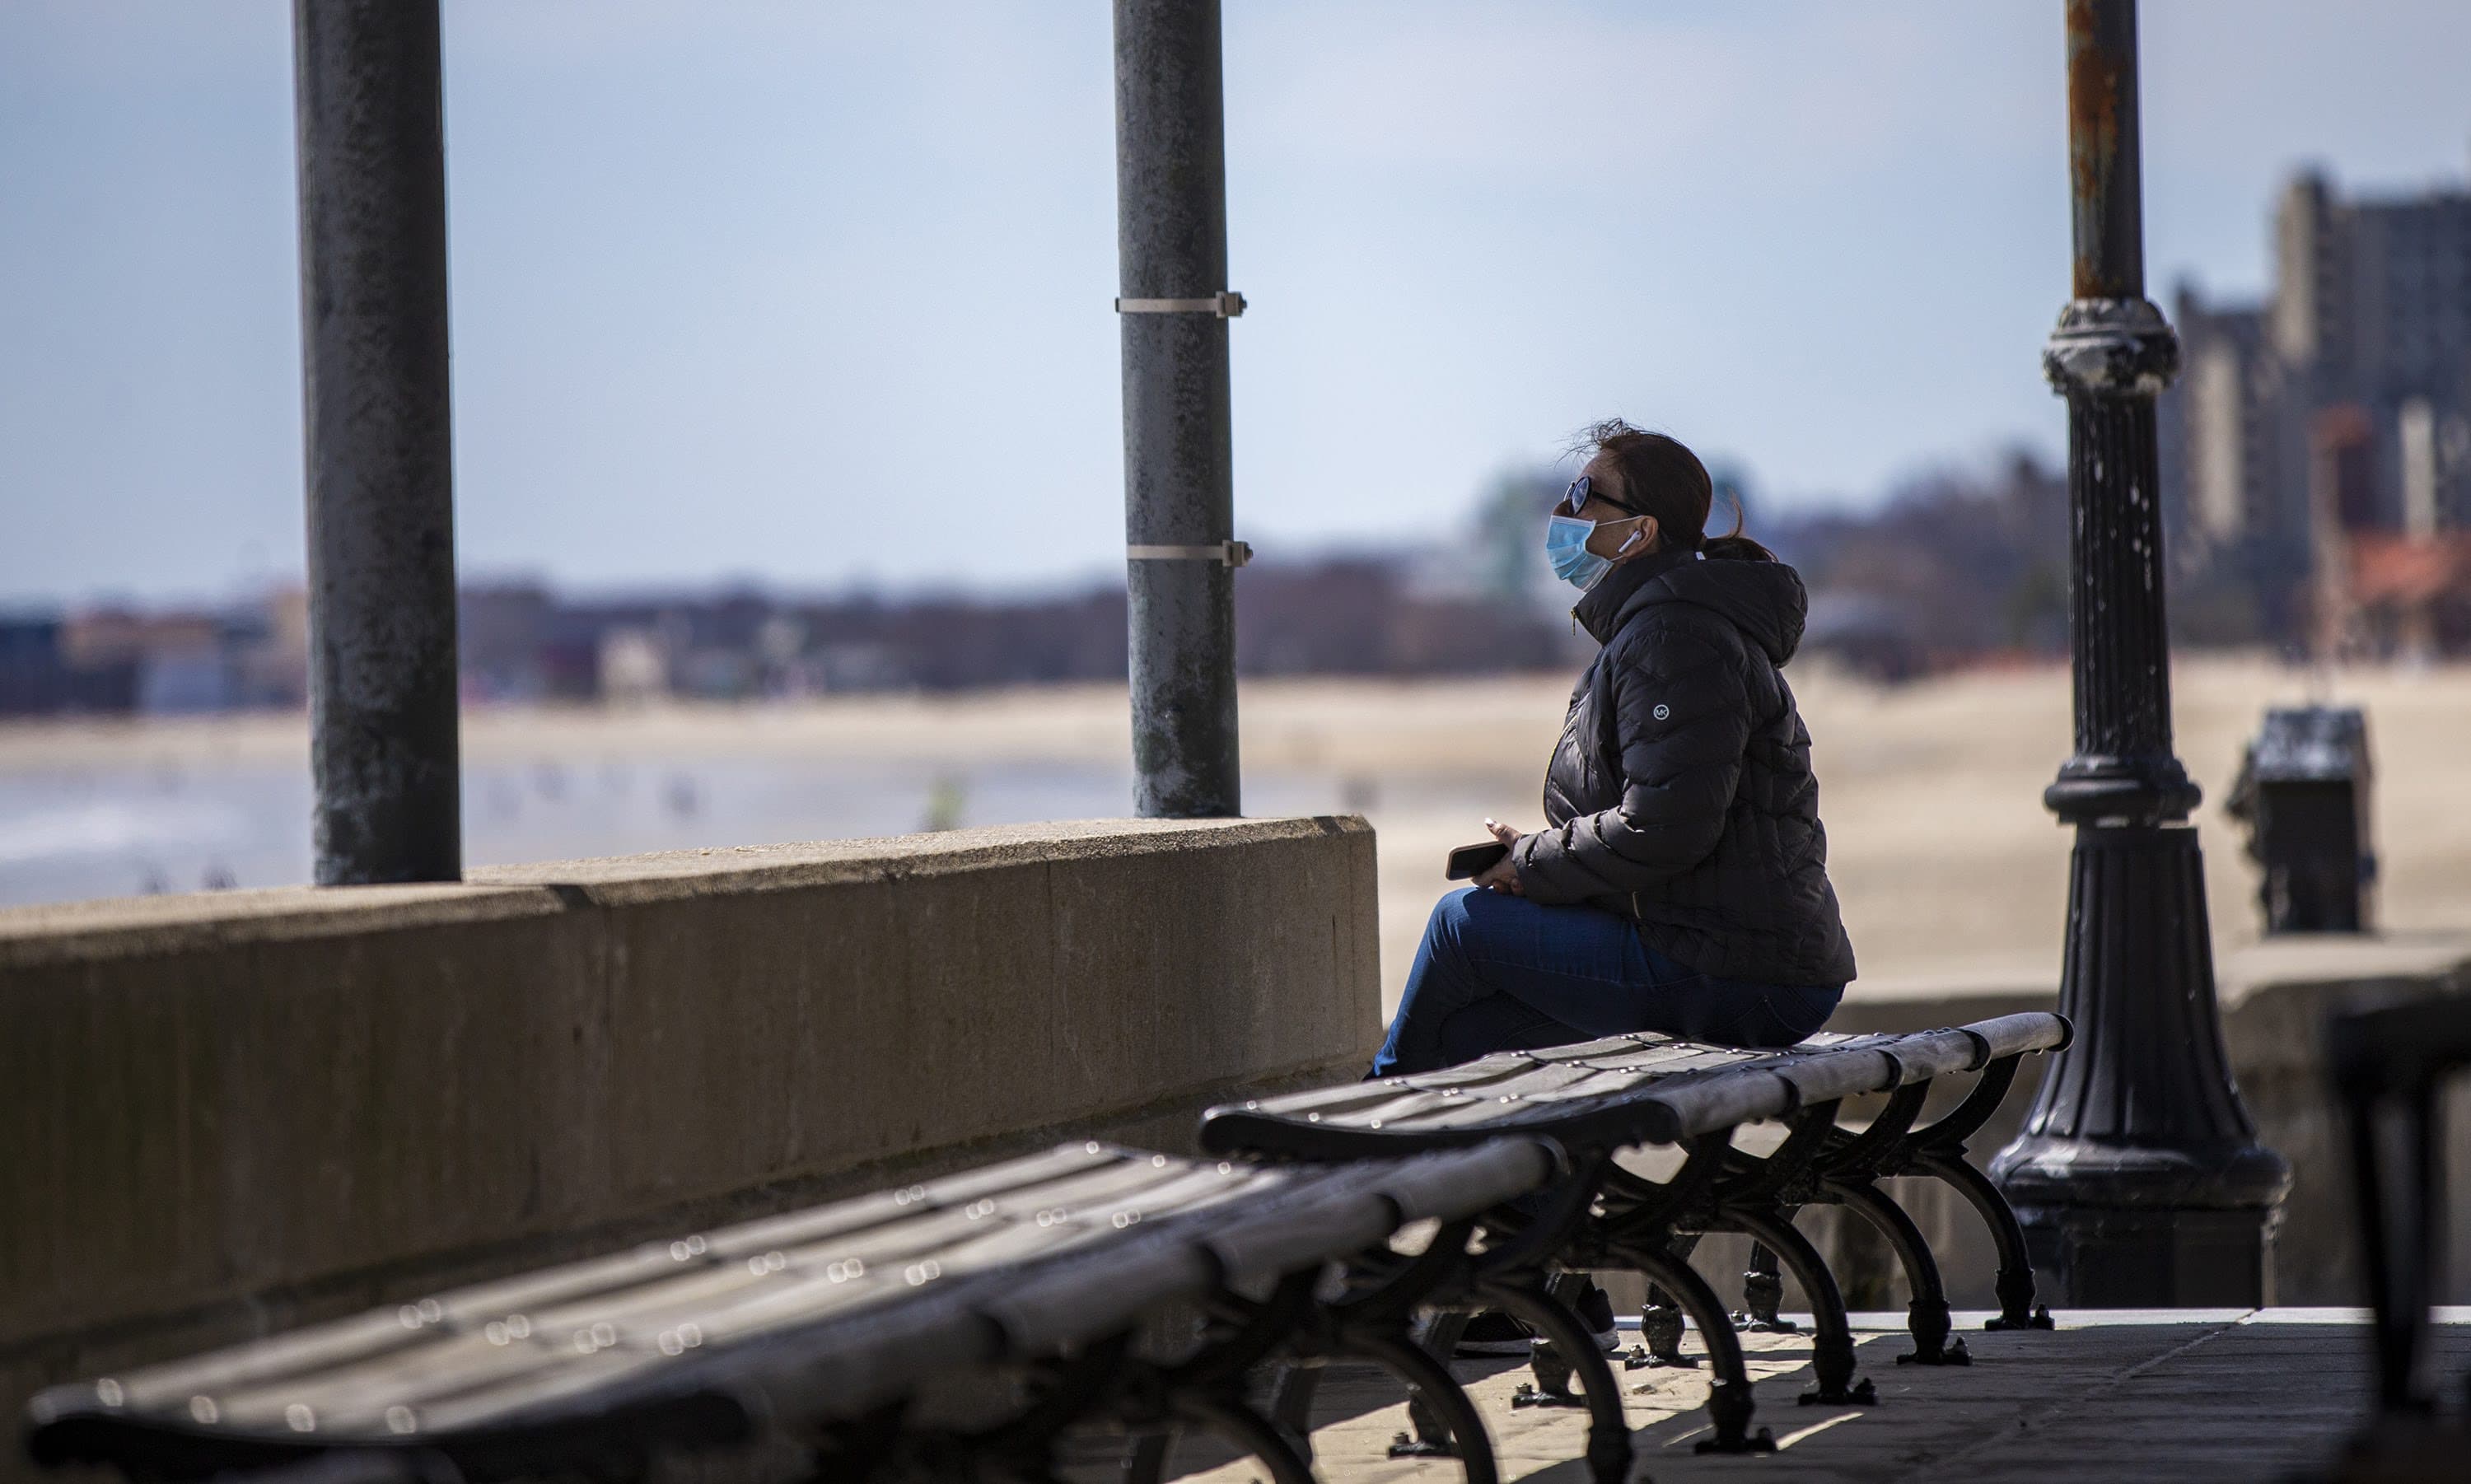 A woman sits alone in an empty pavilion at Revere Beach. (Jesse Costa/WBUR)